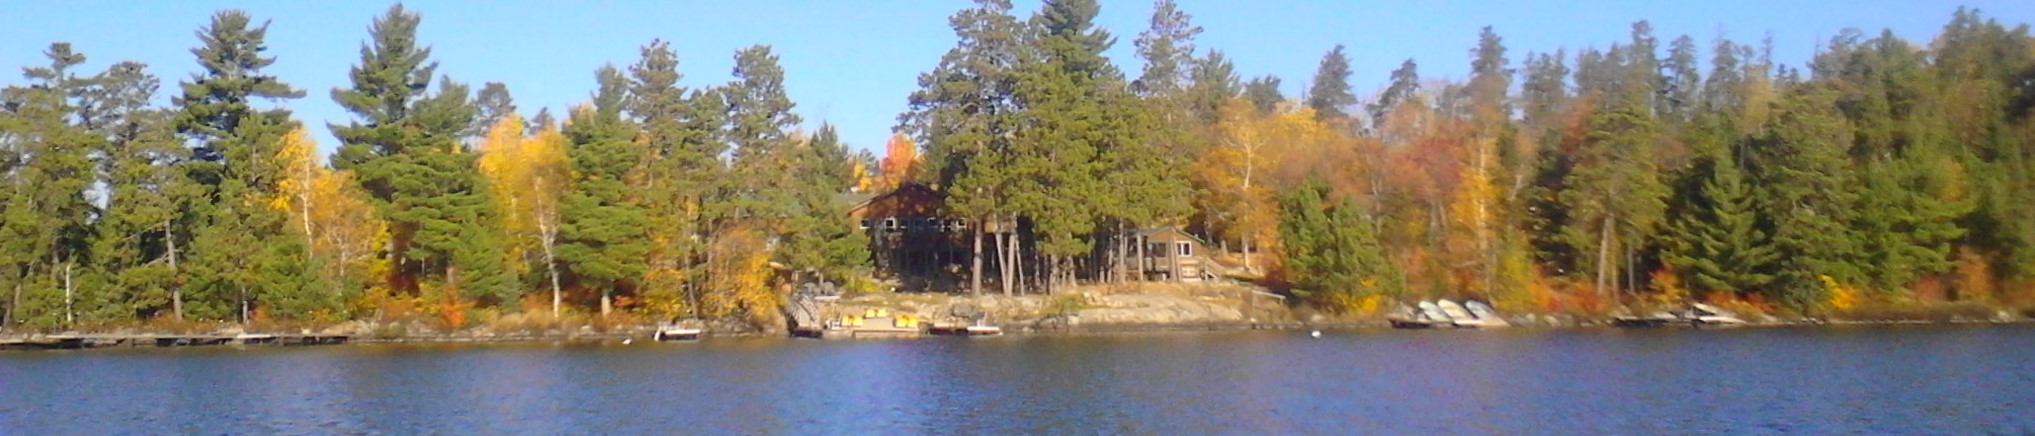 Big Lake Wilderness Lodge Vacation and Fishing Packages